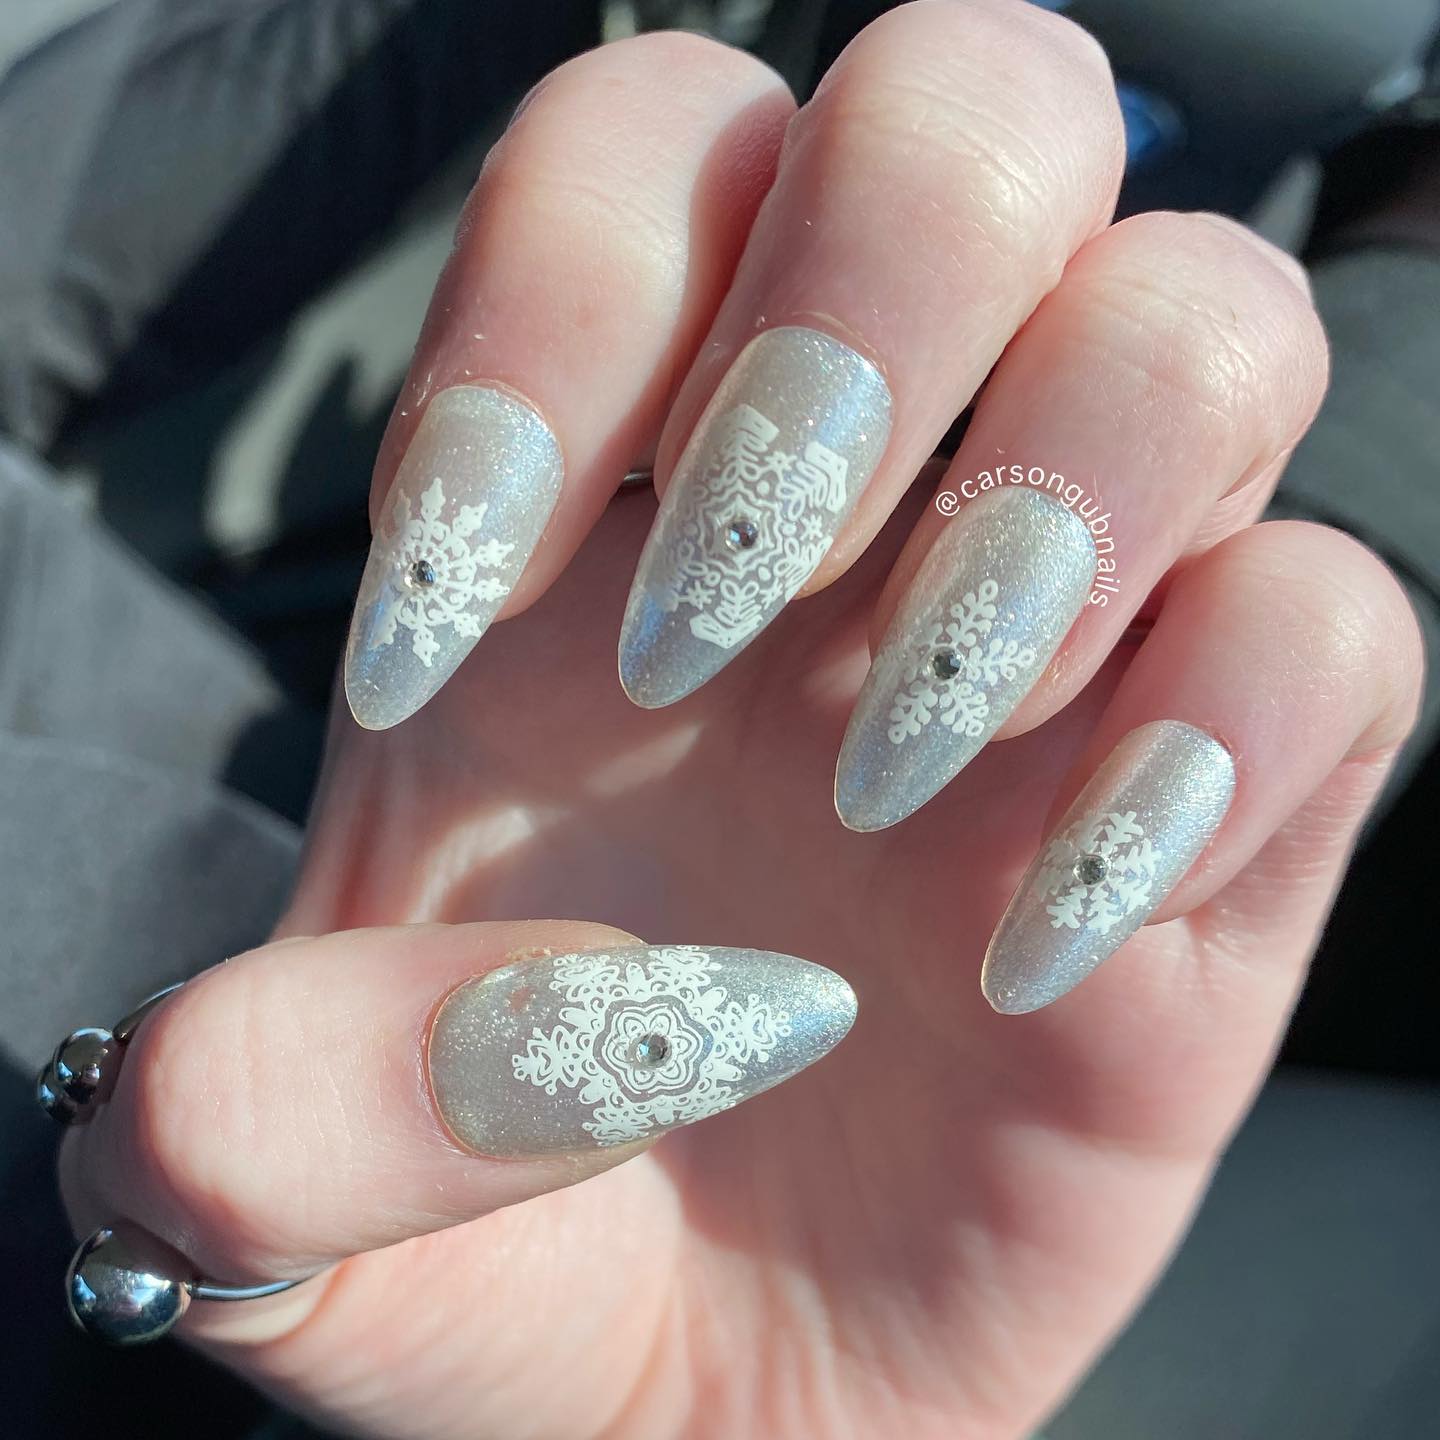  The combination of silver glittered nail polish with white snowflakes is quite matching. Little shiny stones placed in the middle of snowflakes look nice, too.